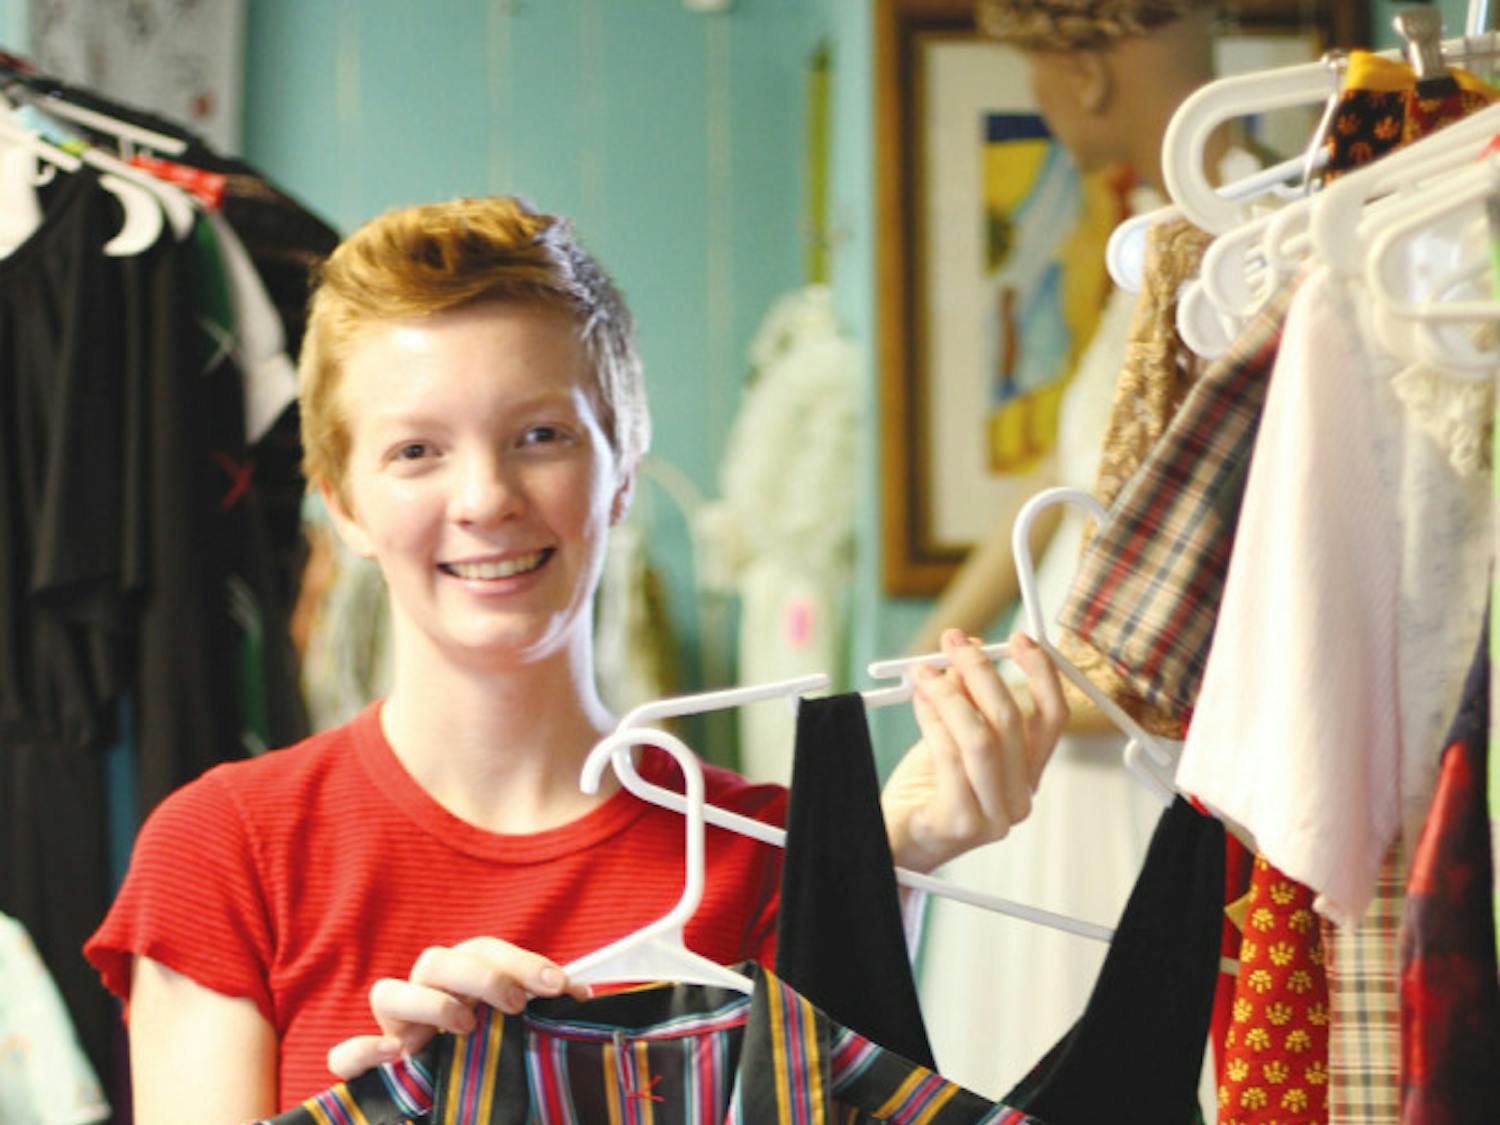 Cori Kate sells her upcycled clothing line, GOSH DARN, at The Eclectic Co. Vintage &amp; Resale Shop.